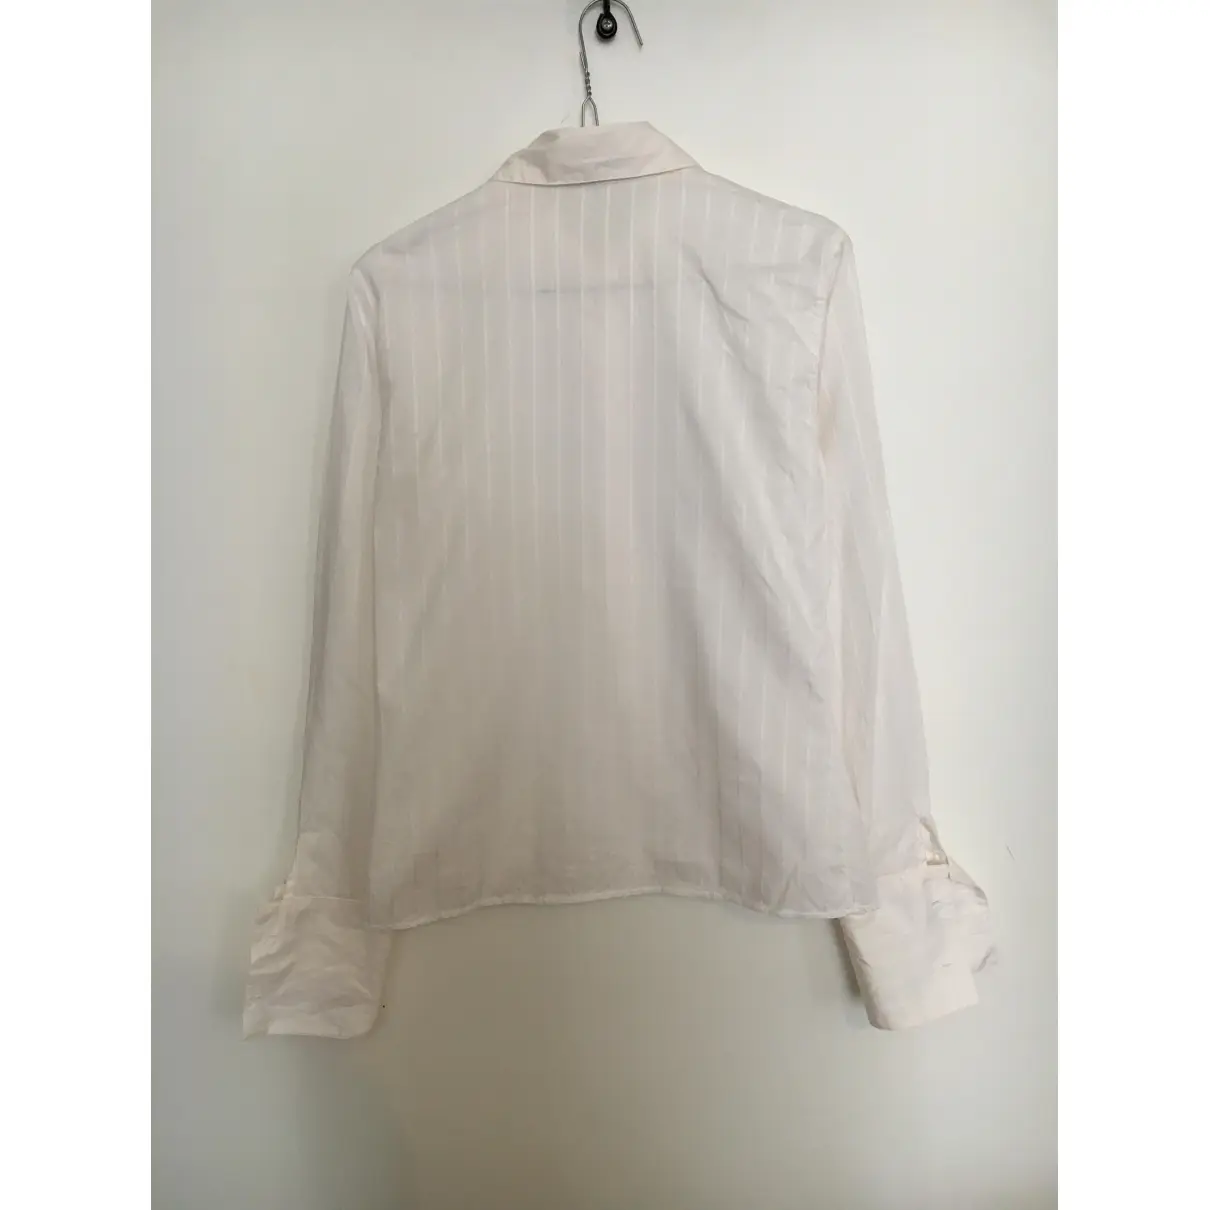 Buy Anne Fontaine Shirt online